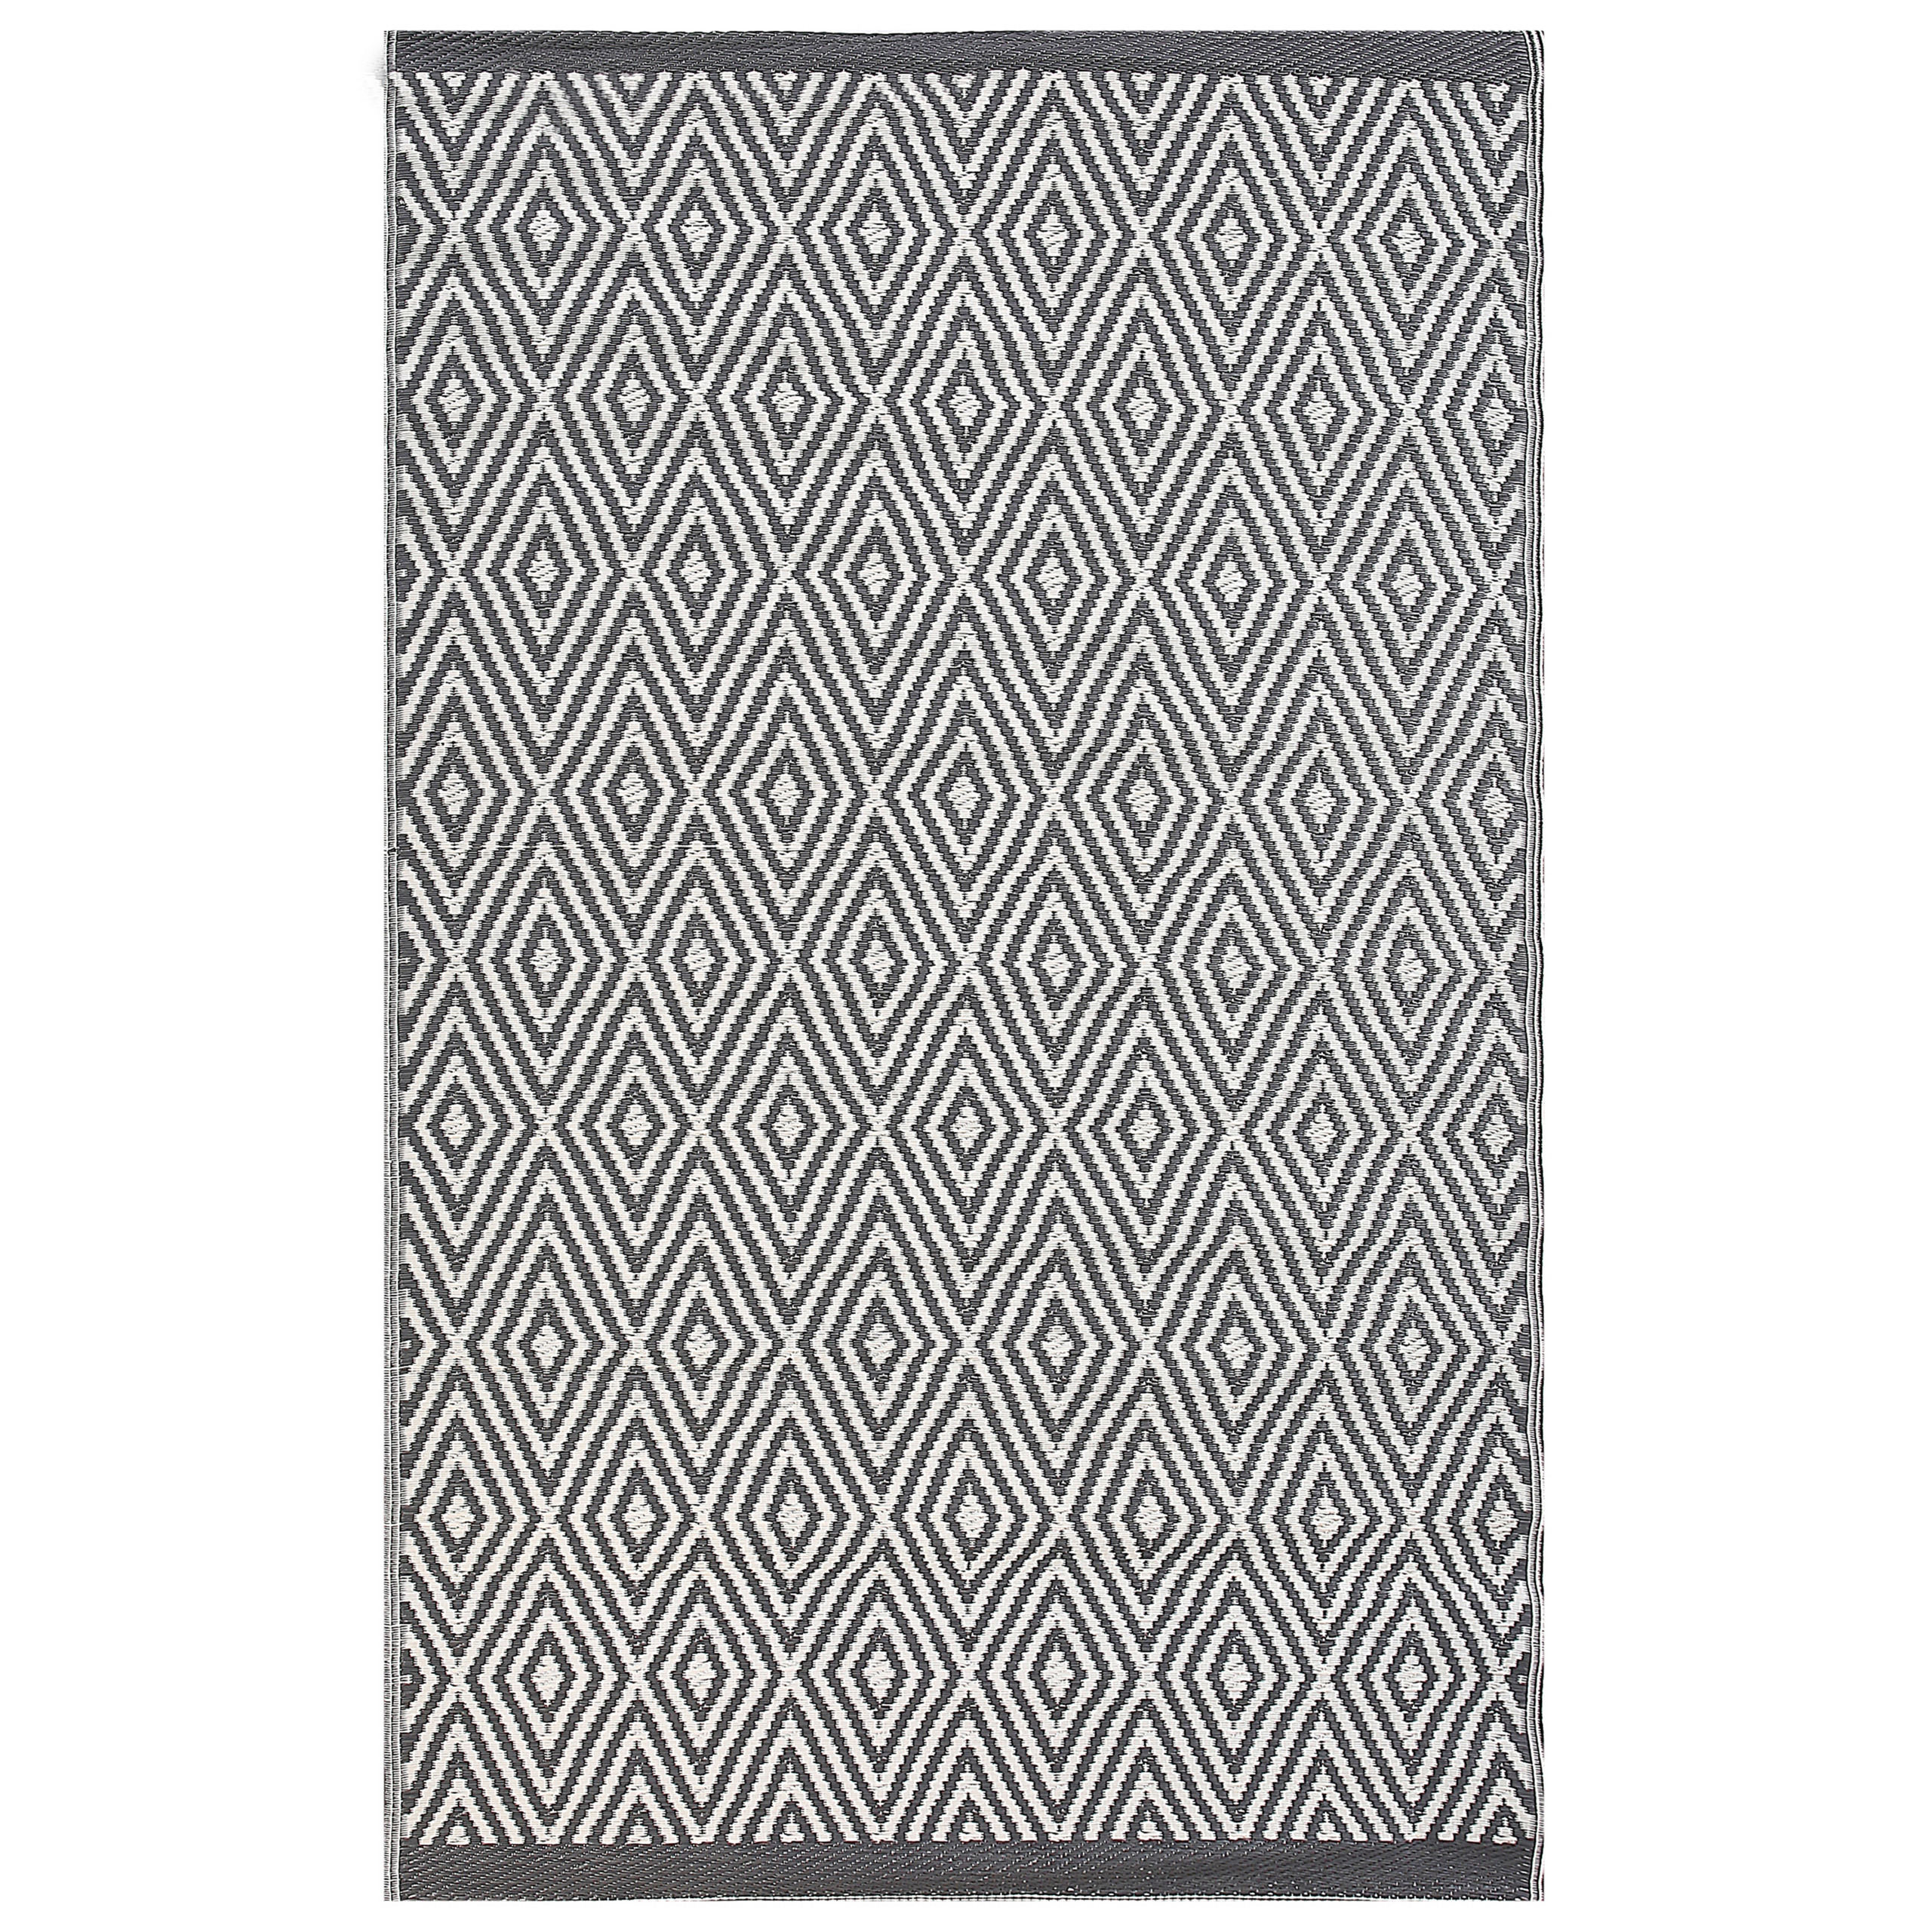 Beliani Outdoor Area Rug Grey Synthetic Material 120 x 180 cm Recycled Geometric Pattern Indoor Decorations